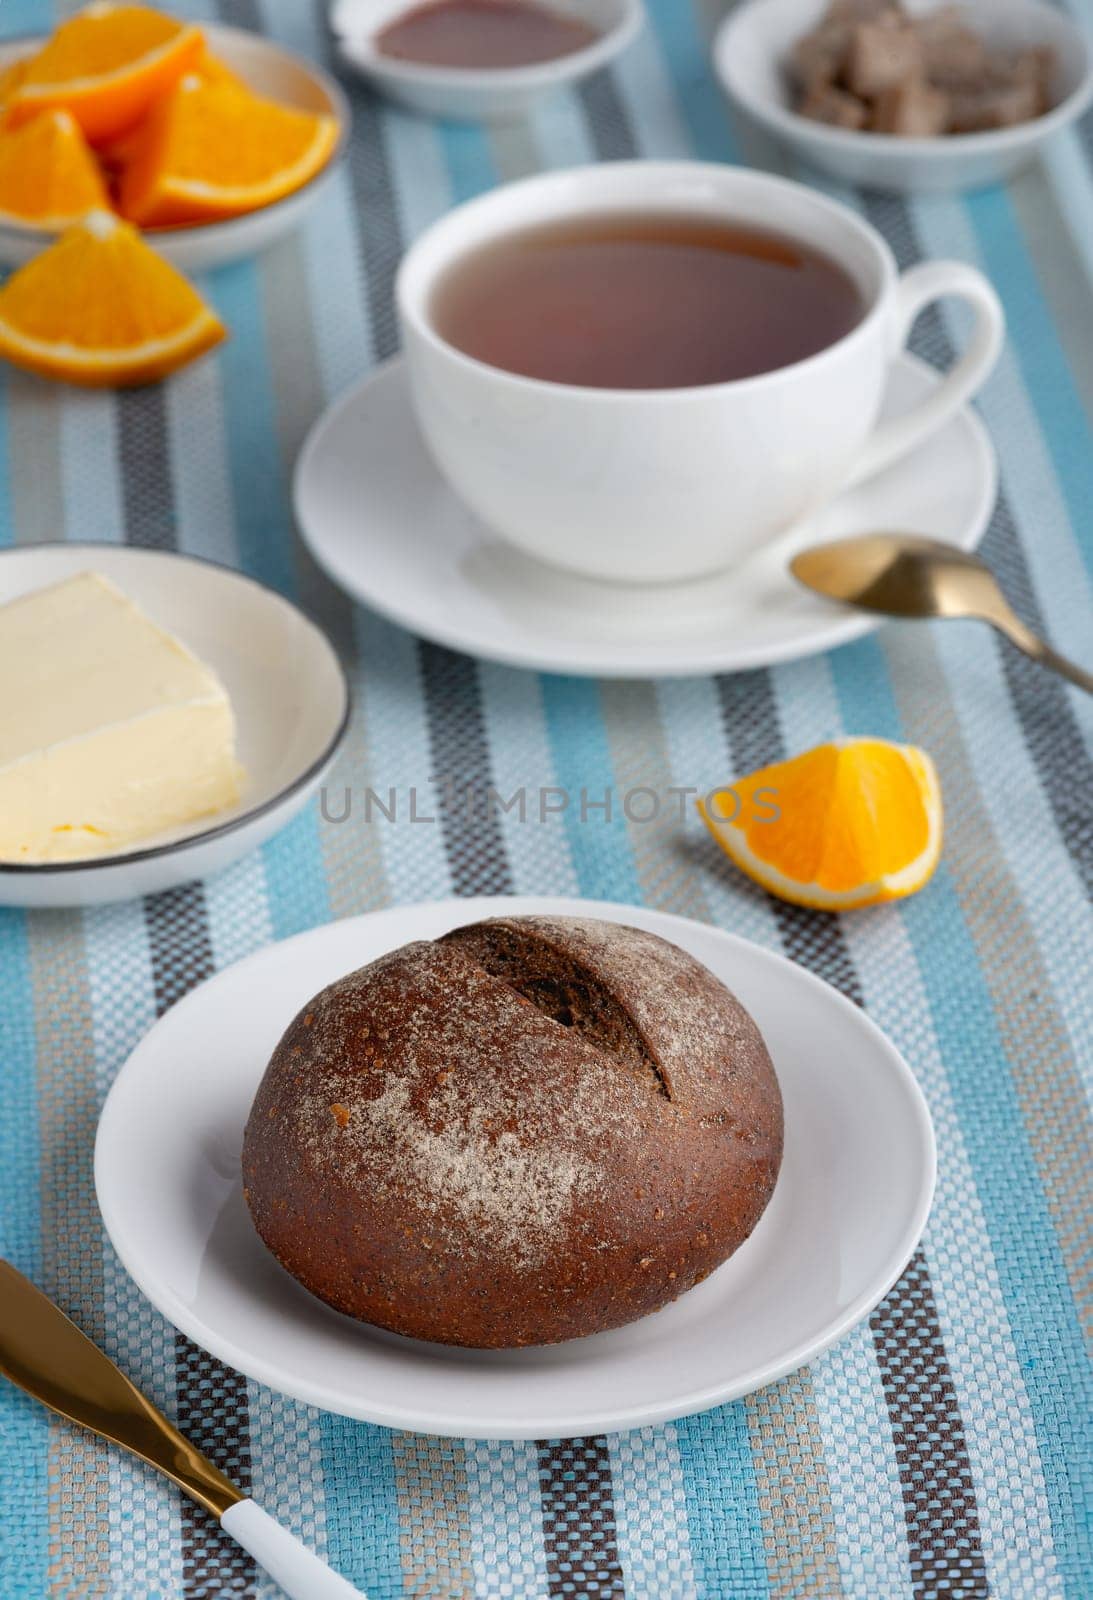 Rye bun and breakfast butter with tea and orange.